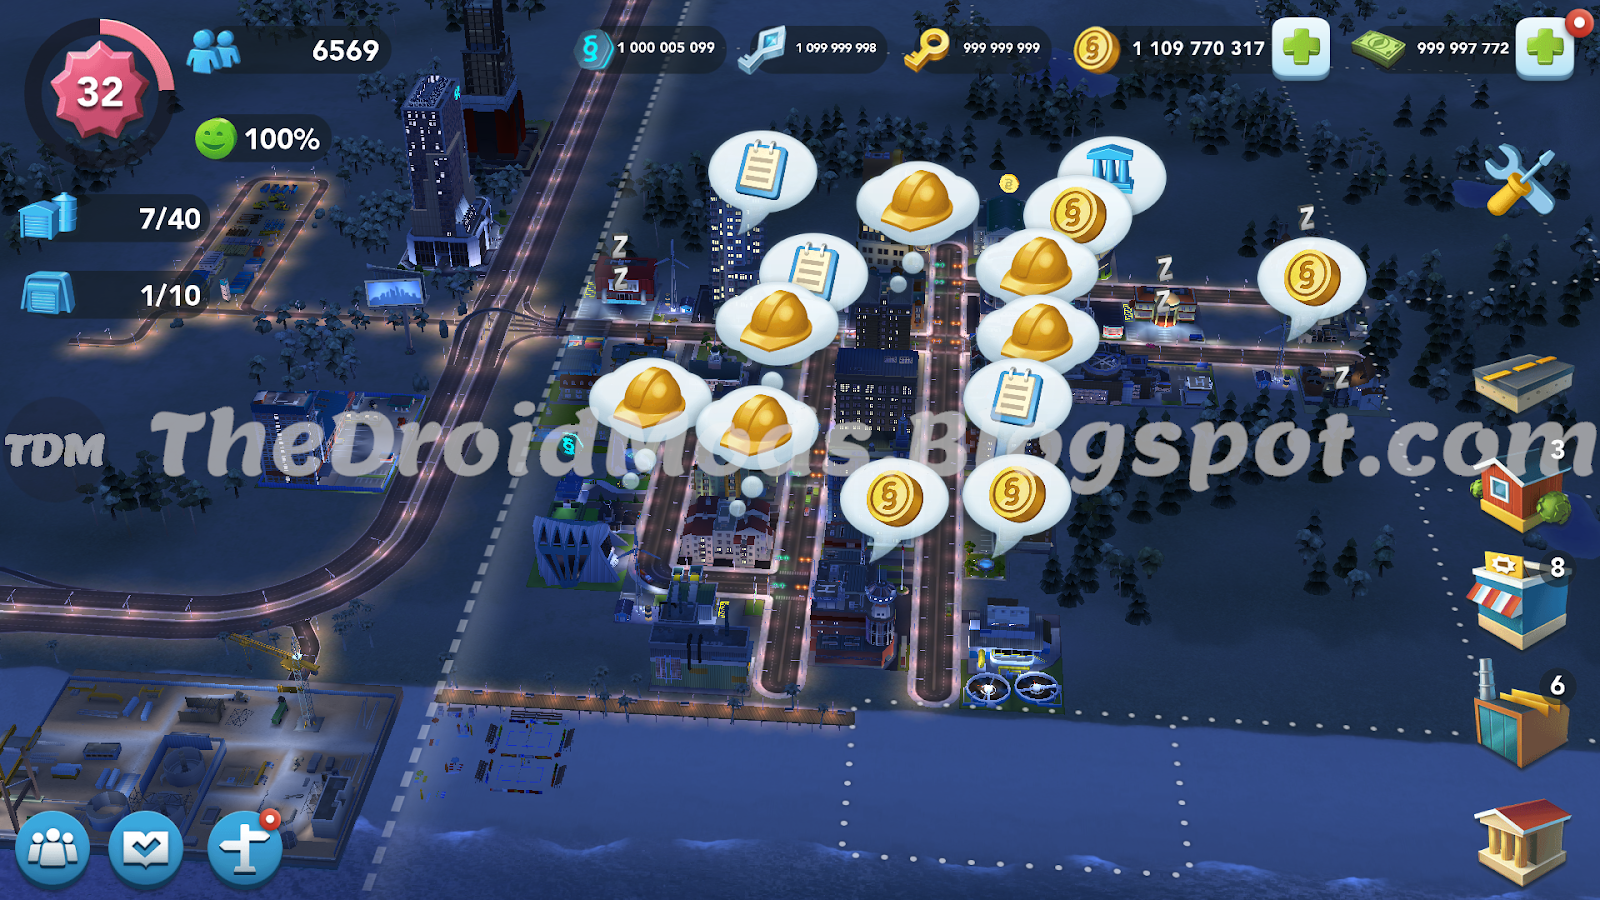 download game the sims 4 mod apk offline